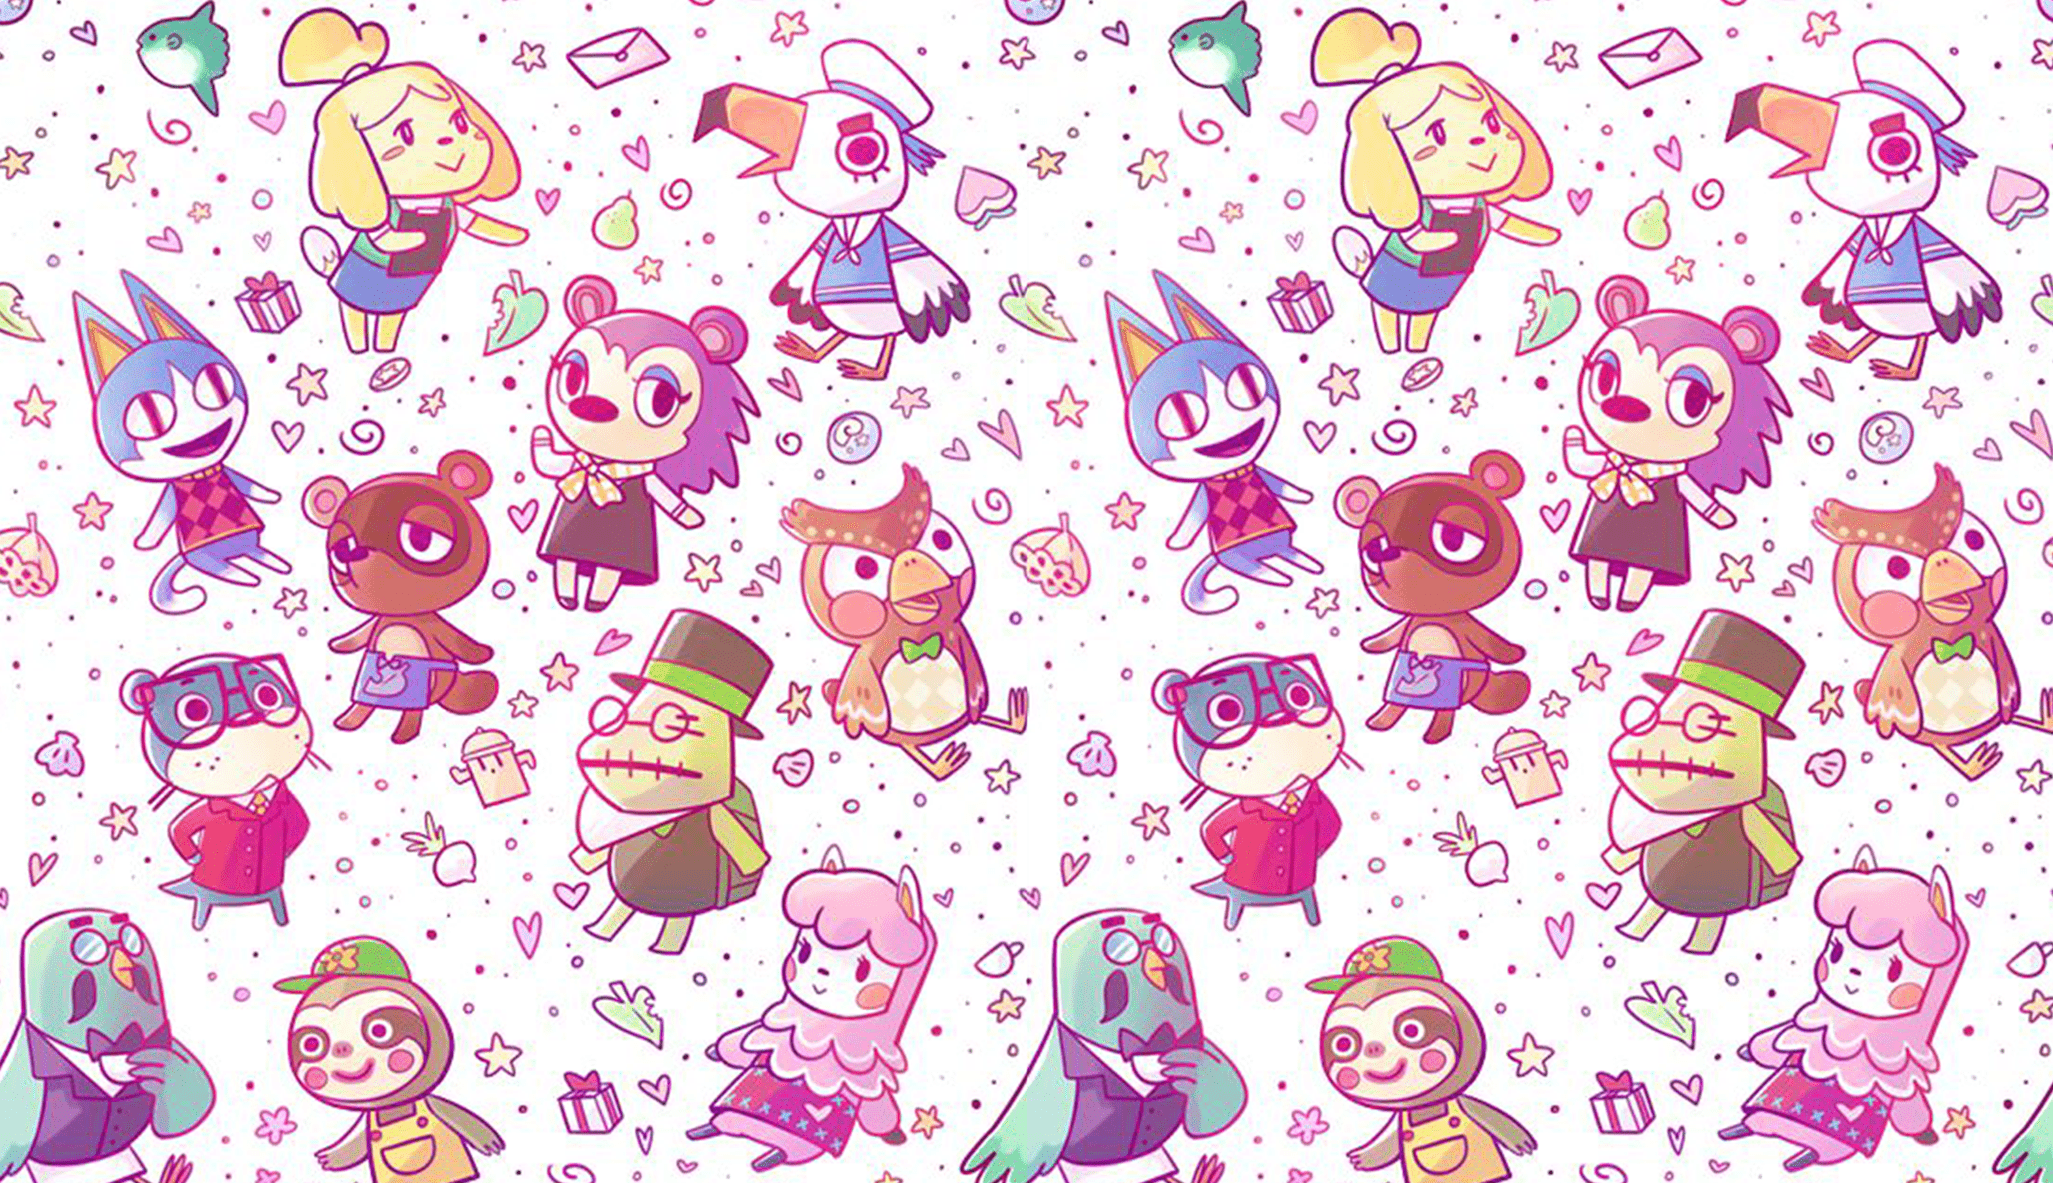 A pattern of animal characters in different colors - Animal Crossing